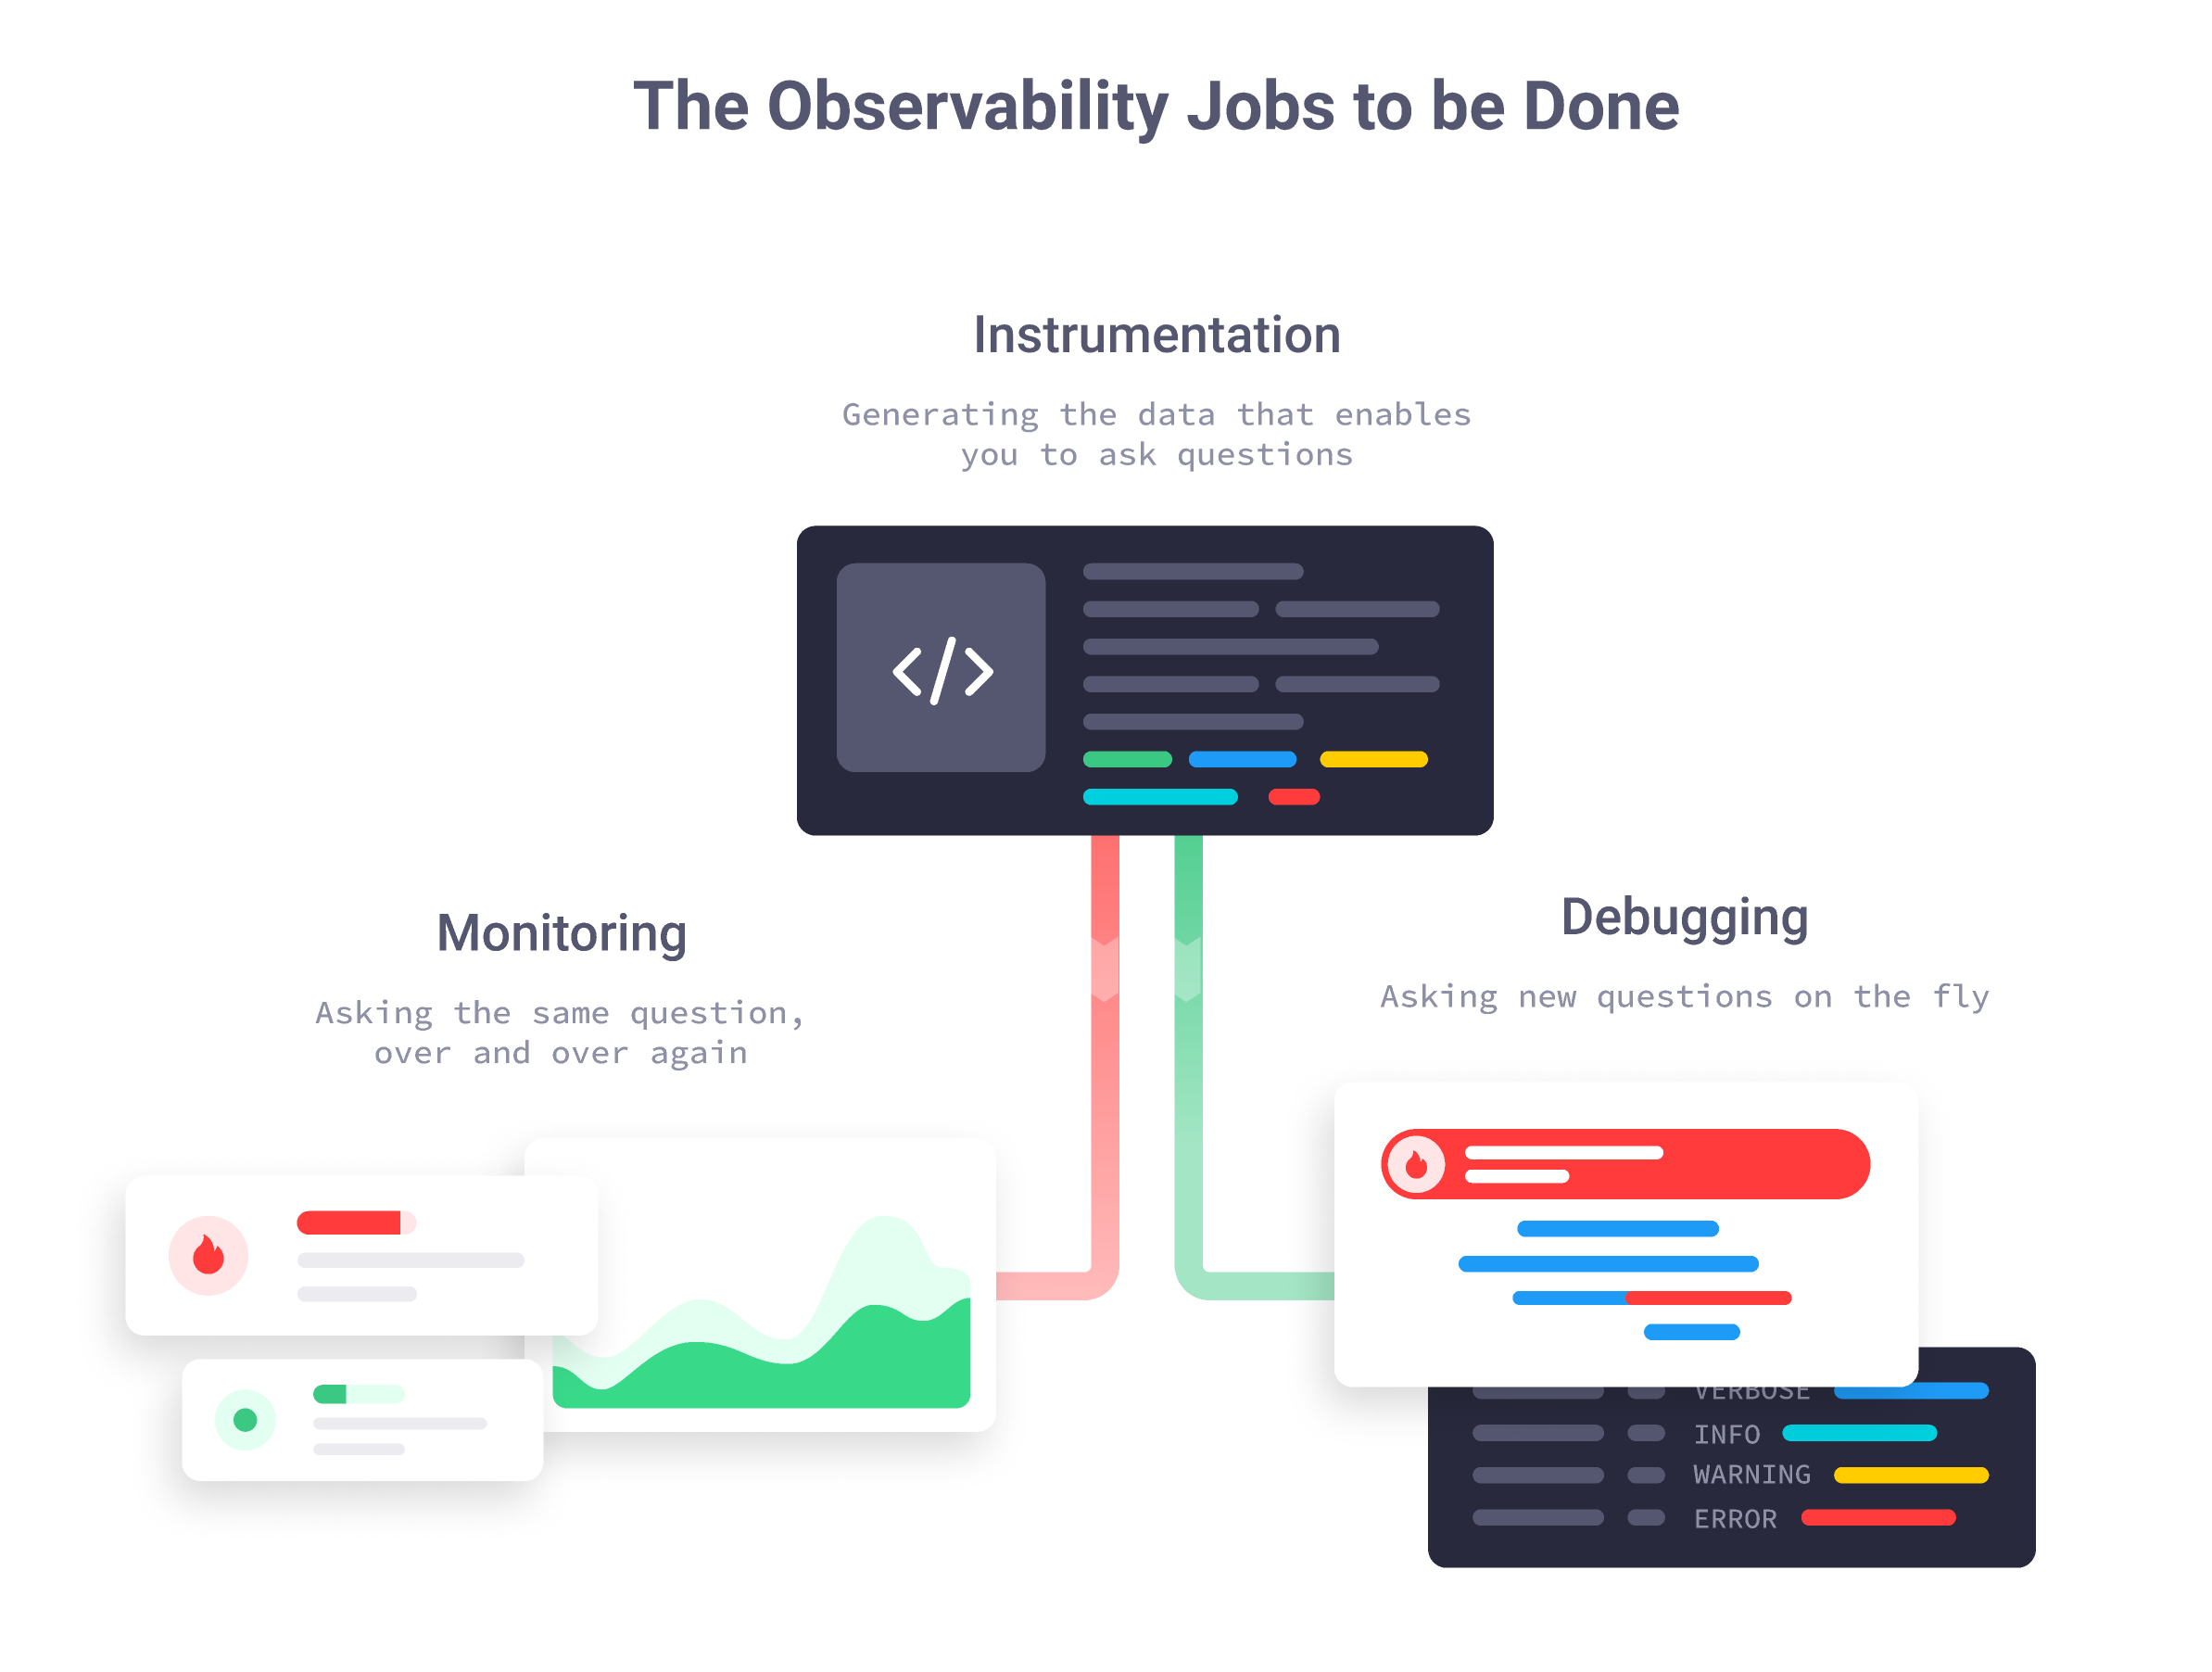 The Observability Jobs to be Done: instrumentation, monitoring, and debugging